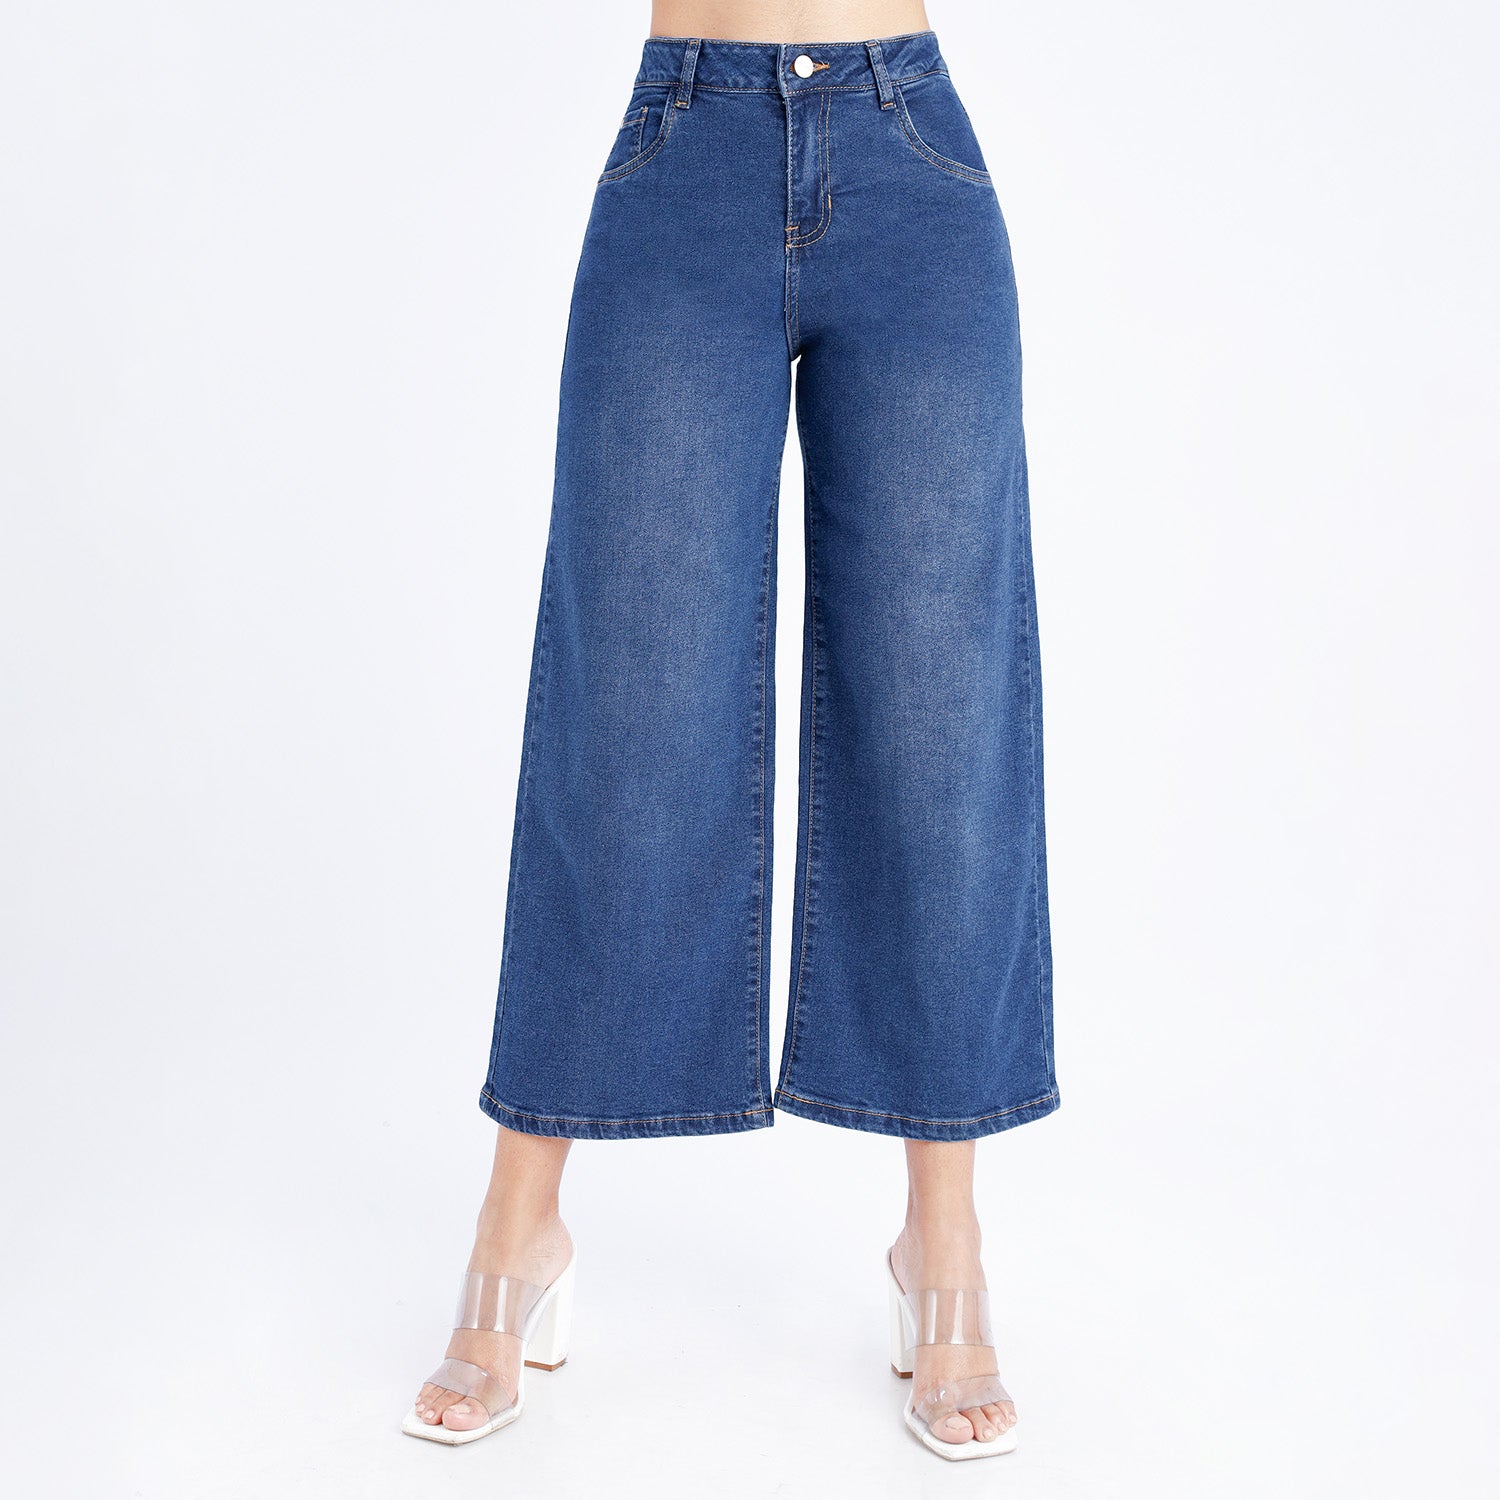 Jeans Culotte para Mujer